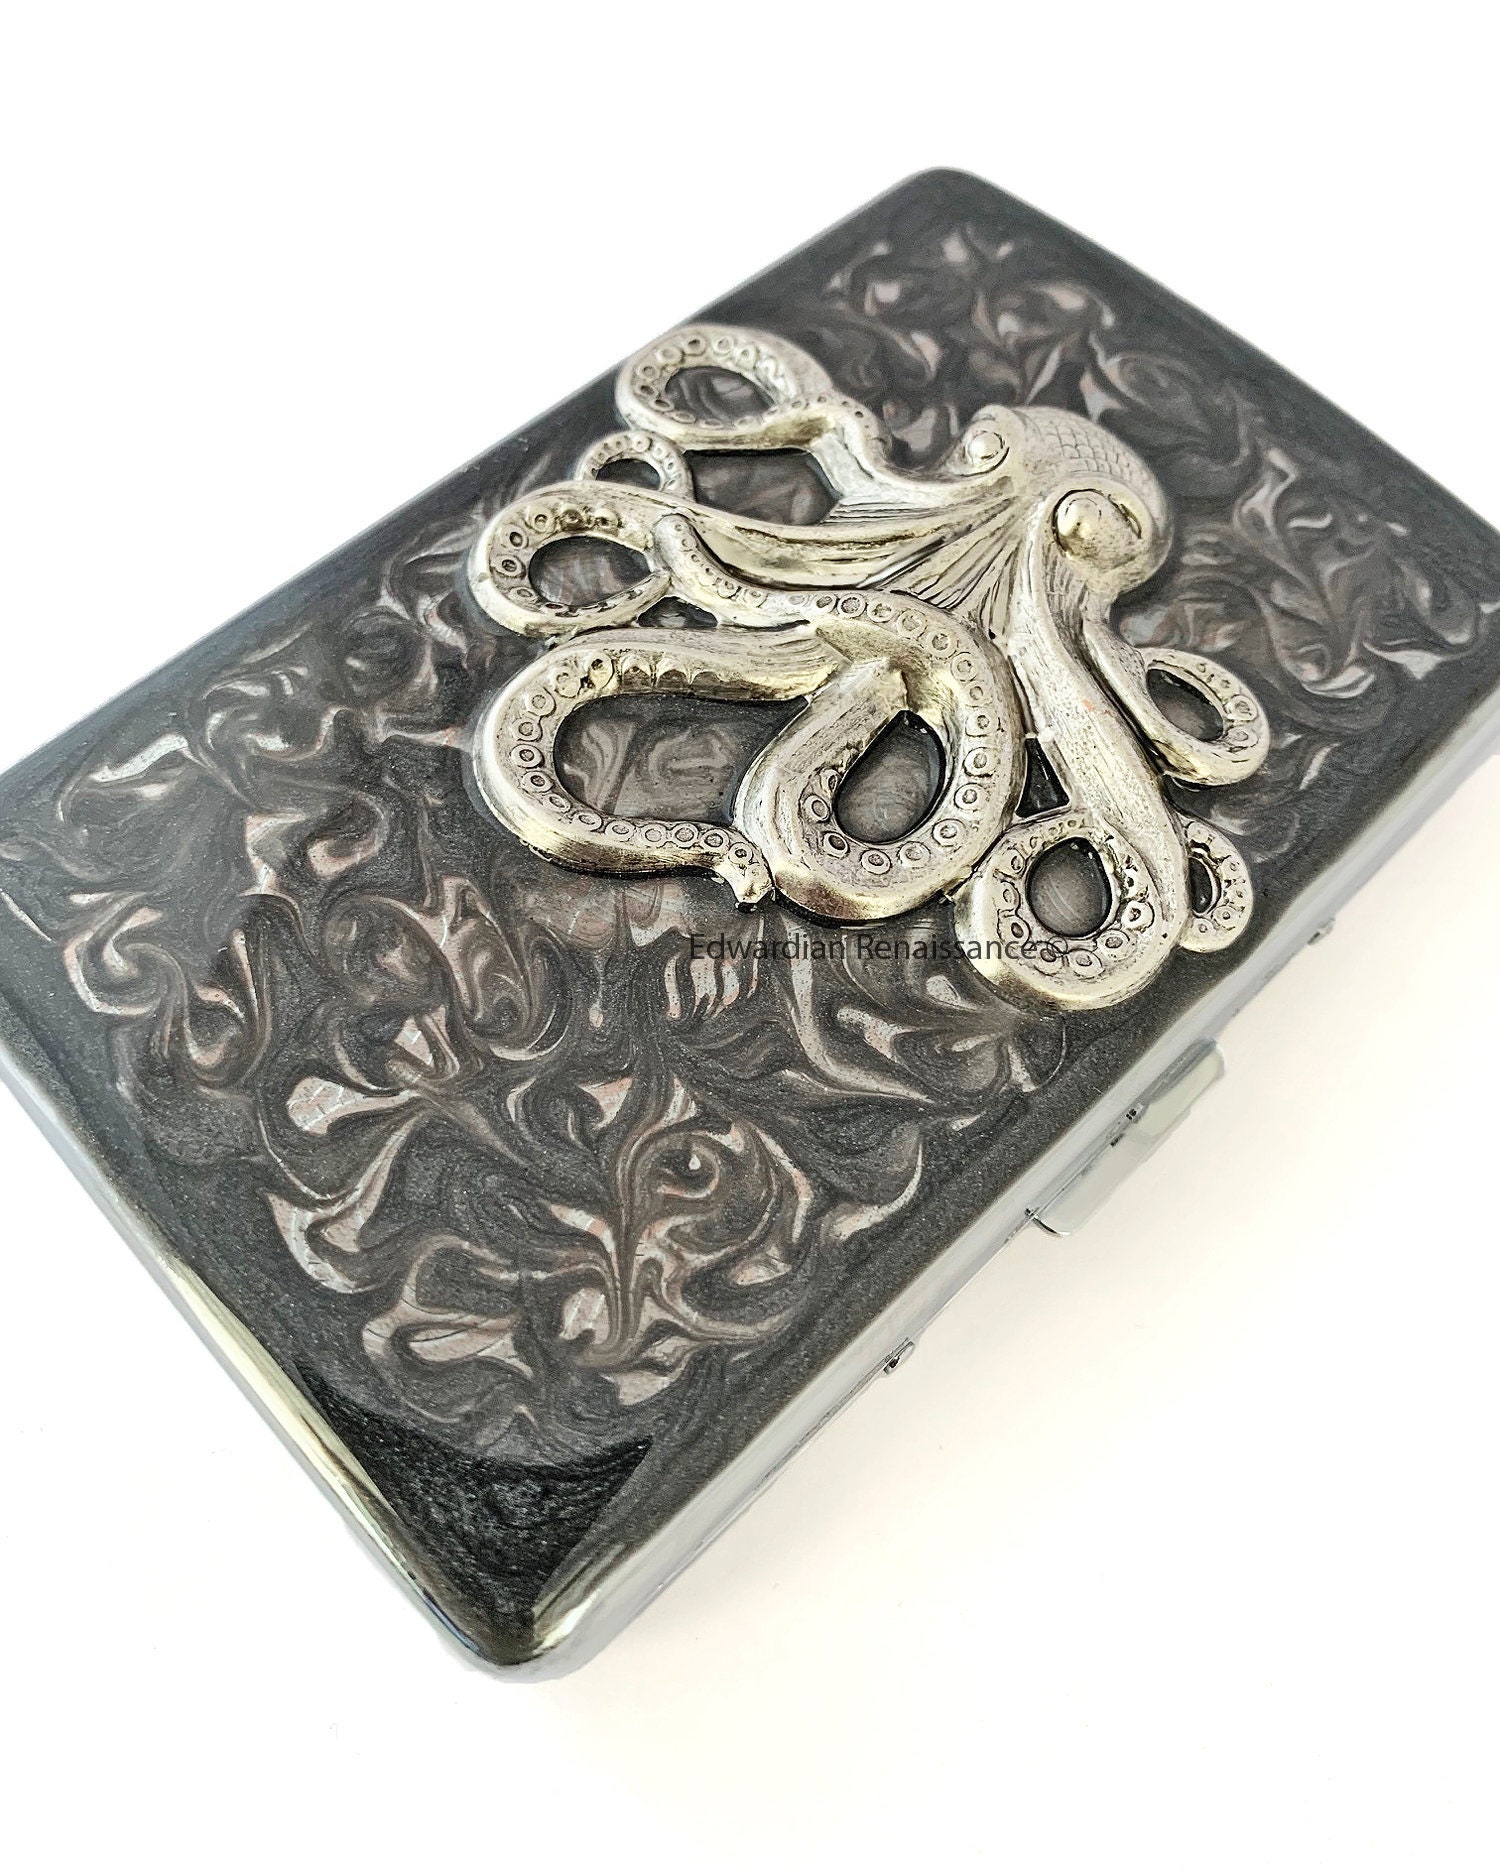 Octopus Metal Cigarette Case Inlaid in Hand Painted Enamel - Etsy